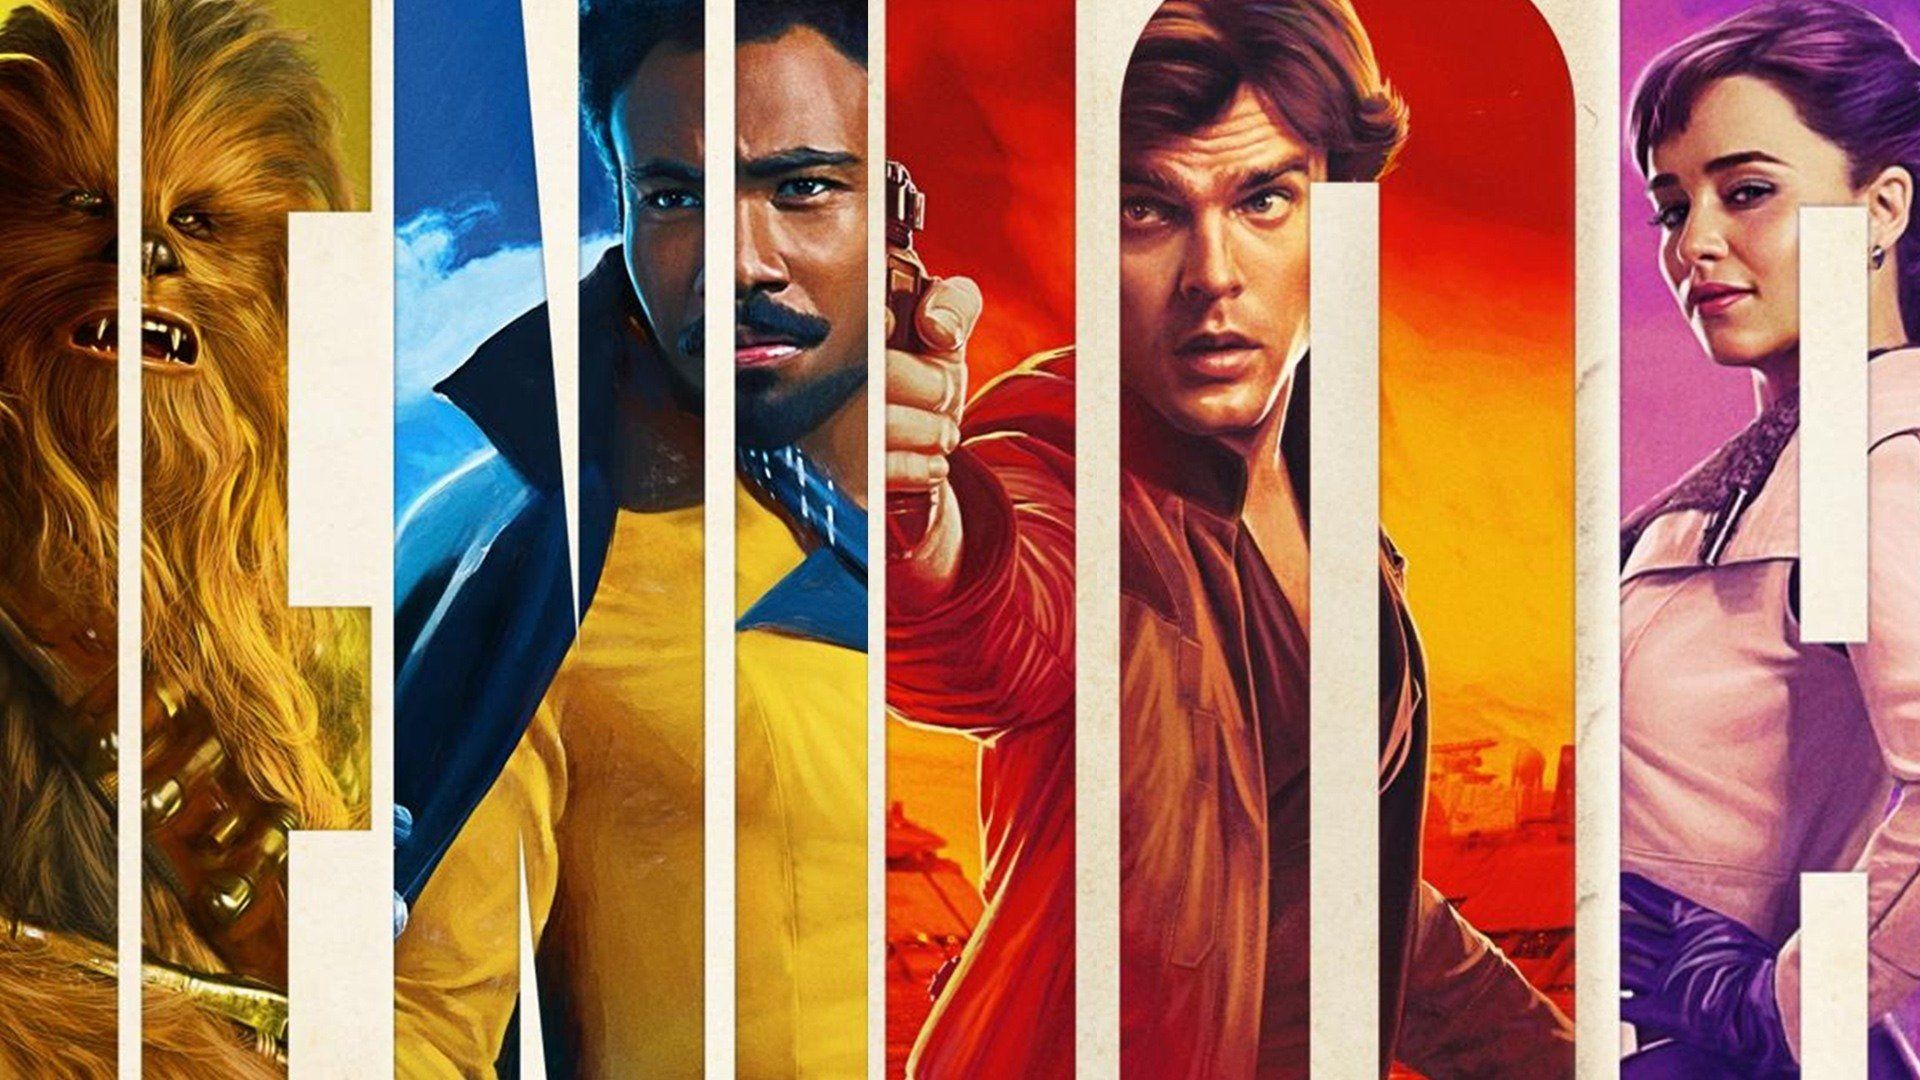 Art of Solo: A Star Wars Story Exclusive Concept Image